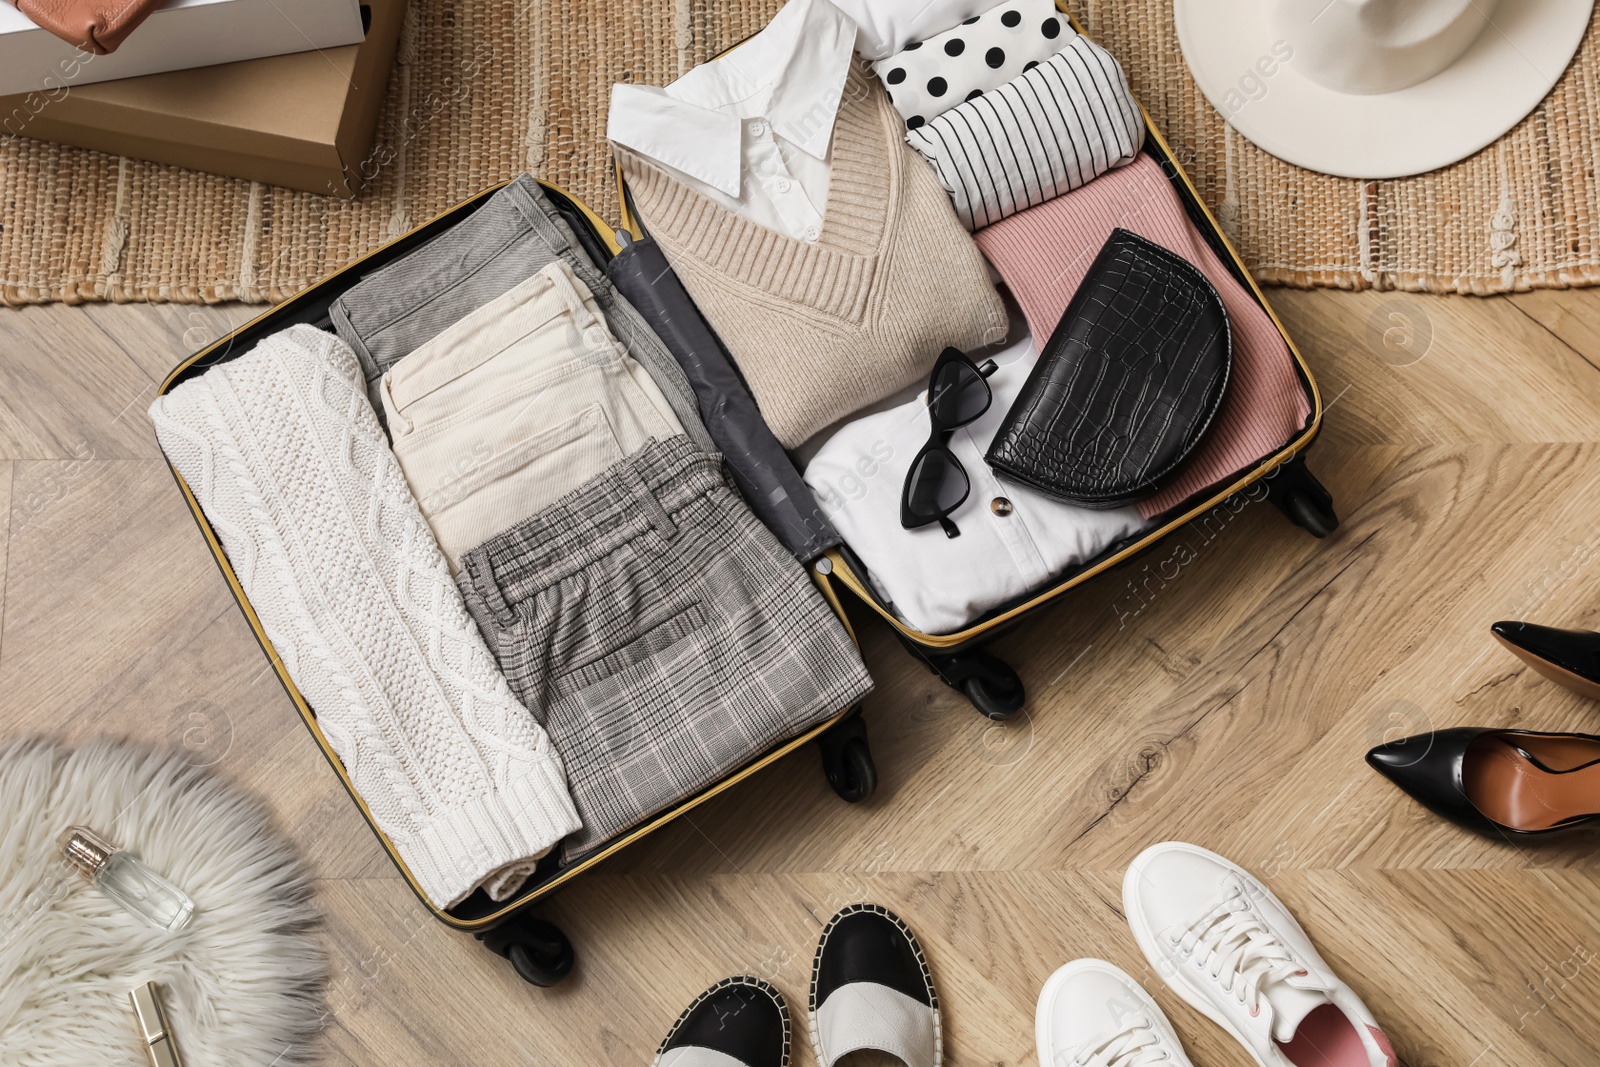 Photo of Open suitcase with folded clothes, accessories and shoes on floor, flat lay